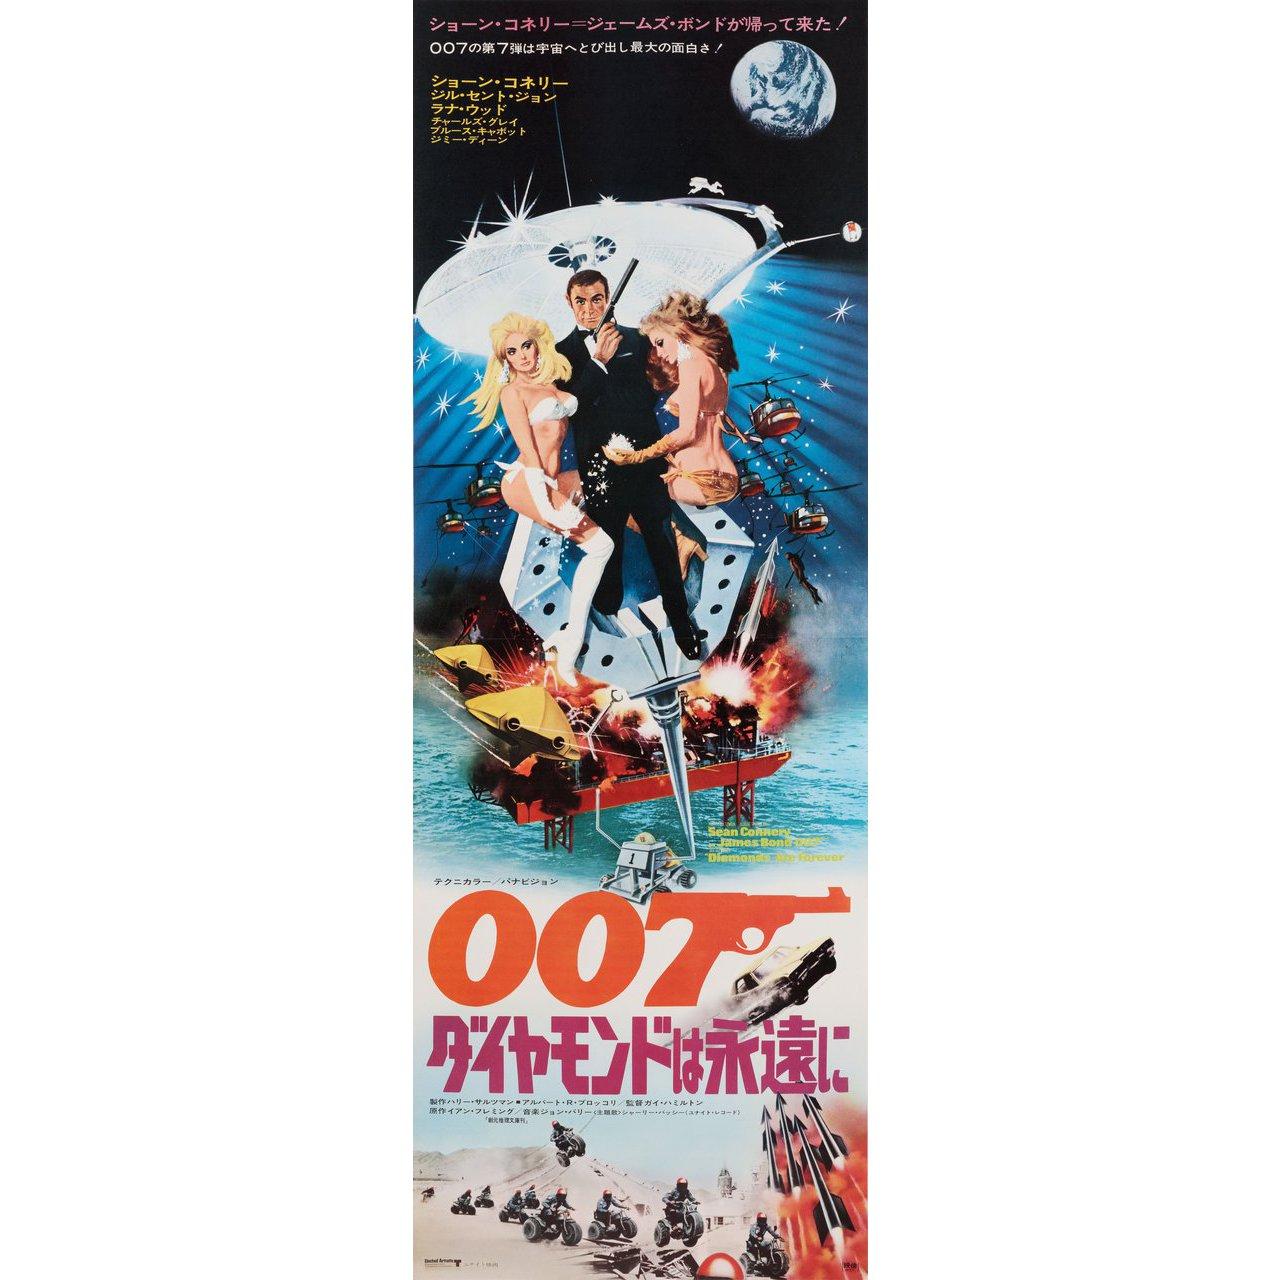 Original 1971 Japanese STB tatekan poster by Robert McGinnis for the film Diamonds Are Forever directed by Guy Hamilton with Sean Connery / Jill St. John / Charles Gray / Lana Wood. Fine condition, linen-backed. This poster has been professionally